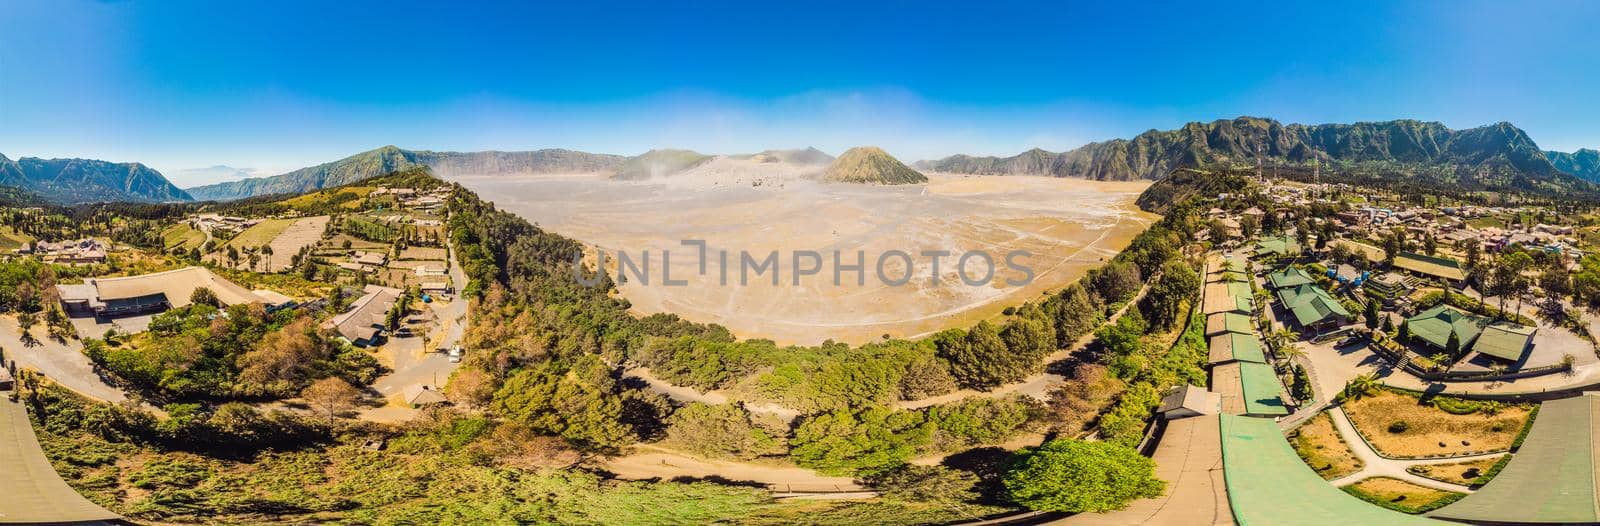 Panoramic Aerial shot of the Bromo volcano and Batok volcano at the Bromo Tengger Semeru National Park on Java Island, Indonesia. One of the most famous volcanic objects in the world. Travel to Indonesia concept by galitskaya